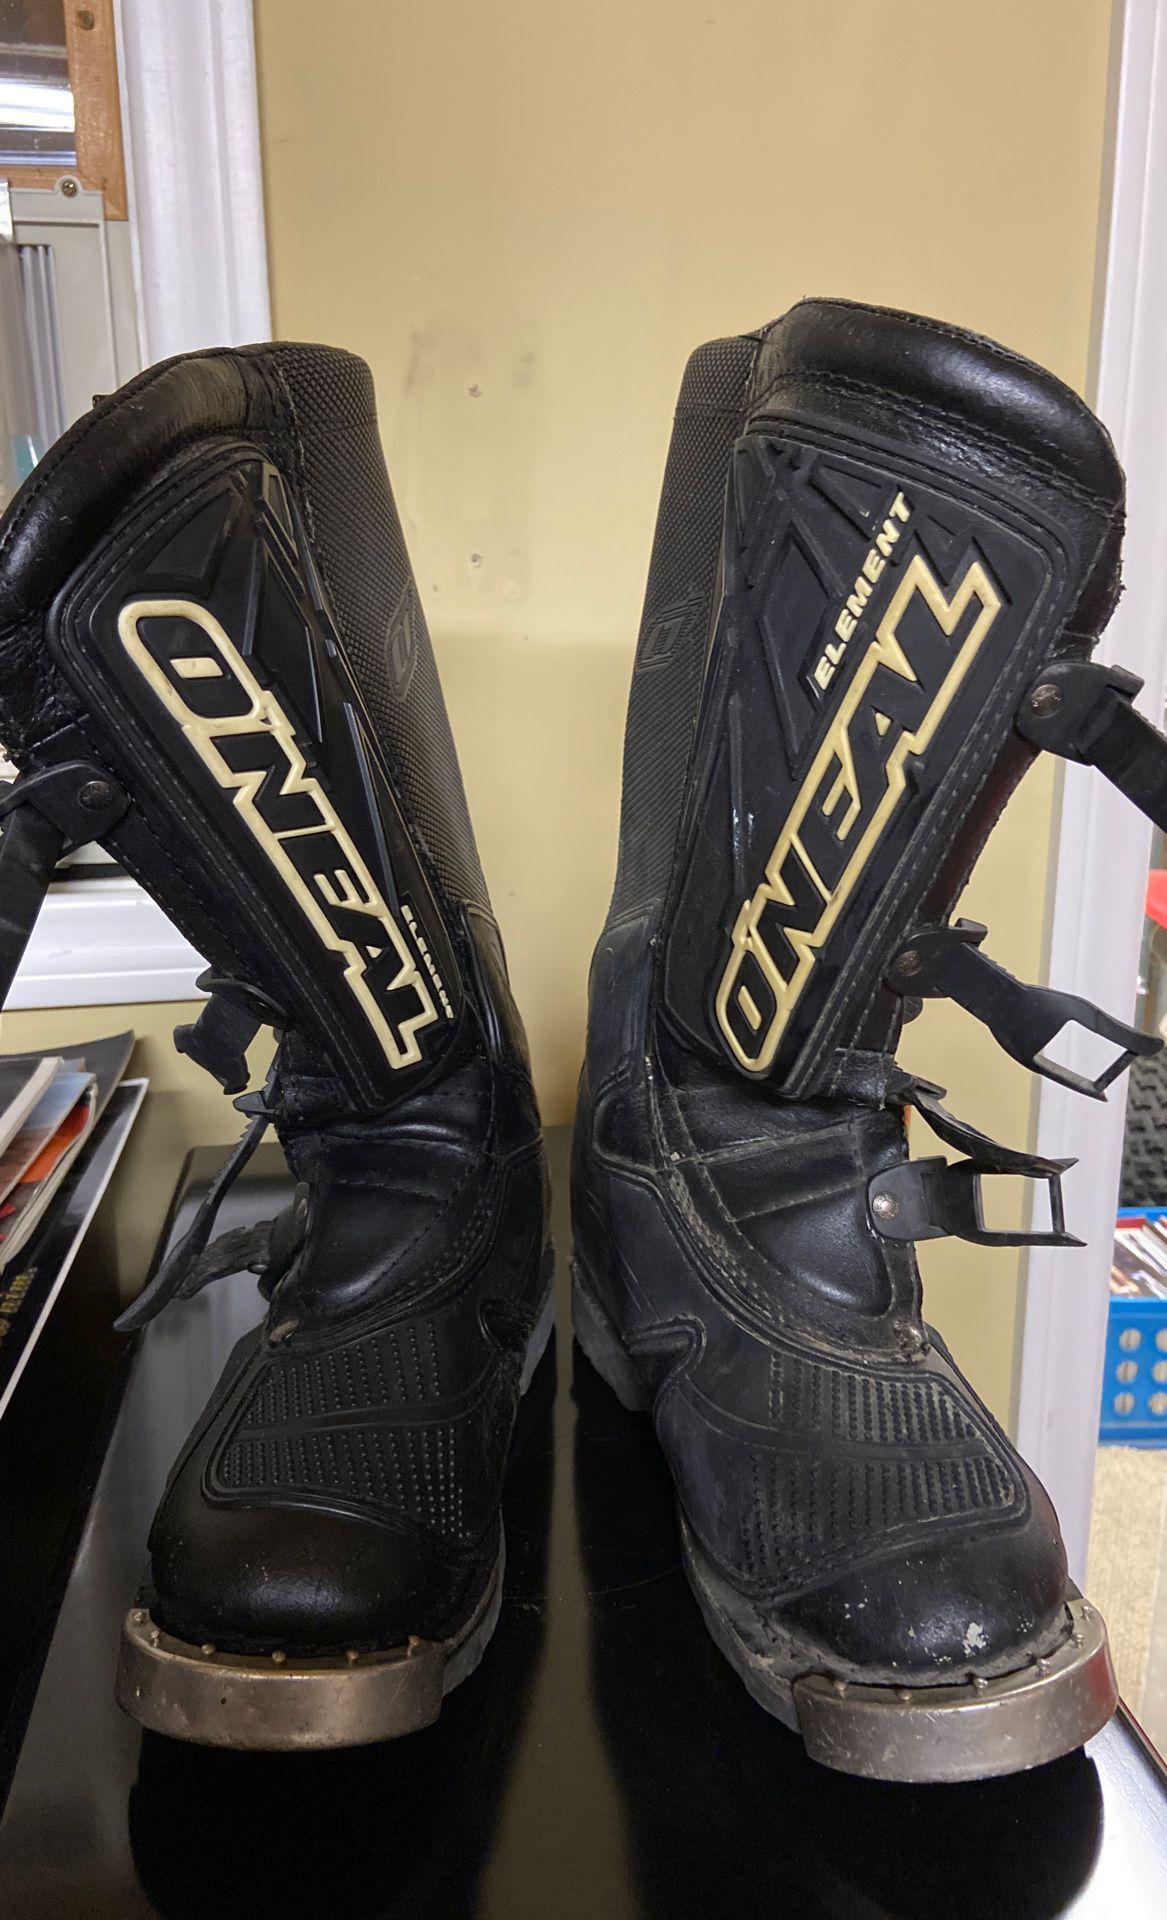 O’Neill Motorcycle boots